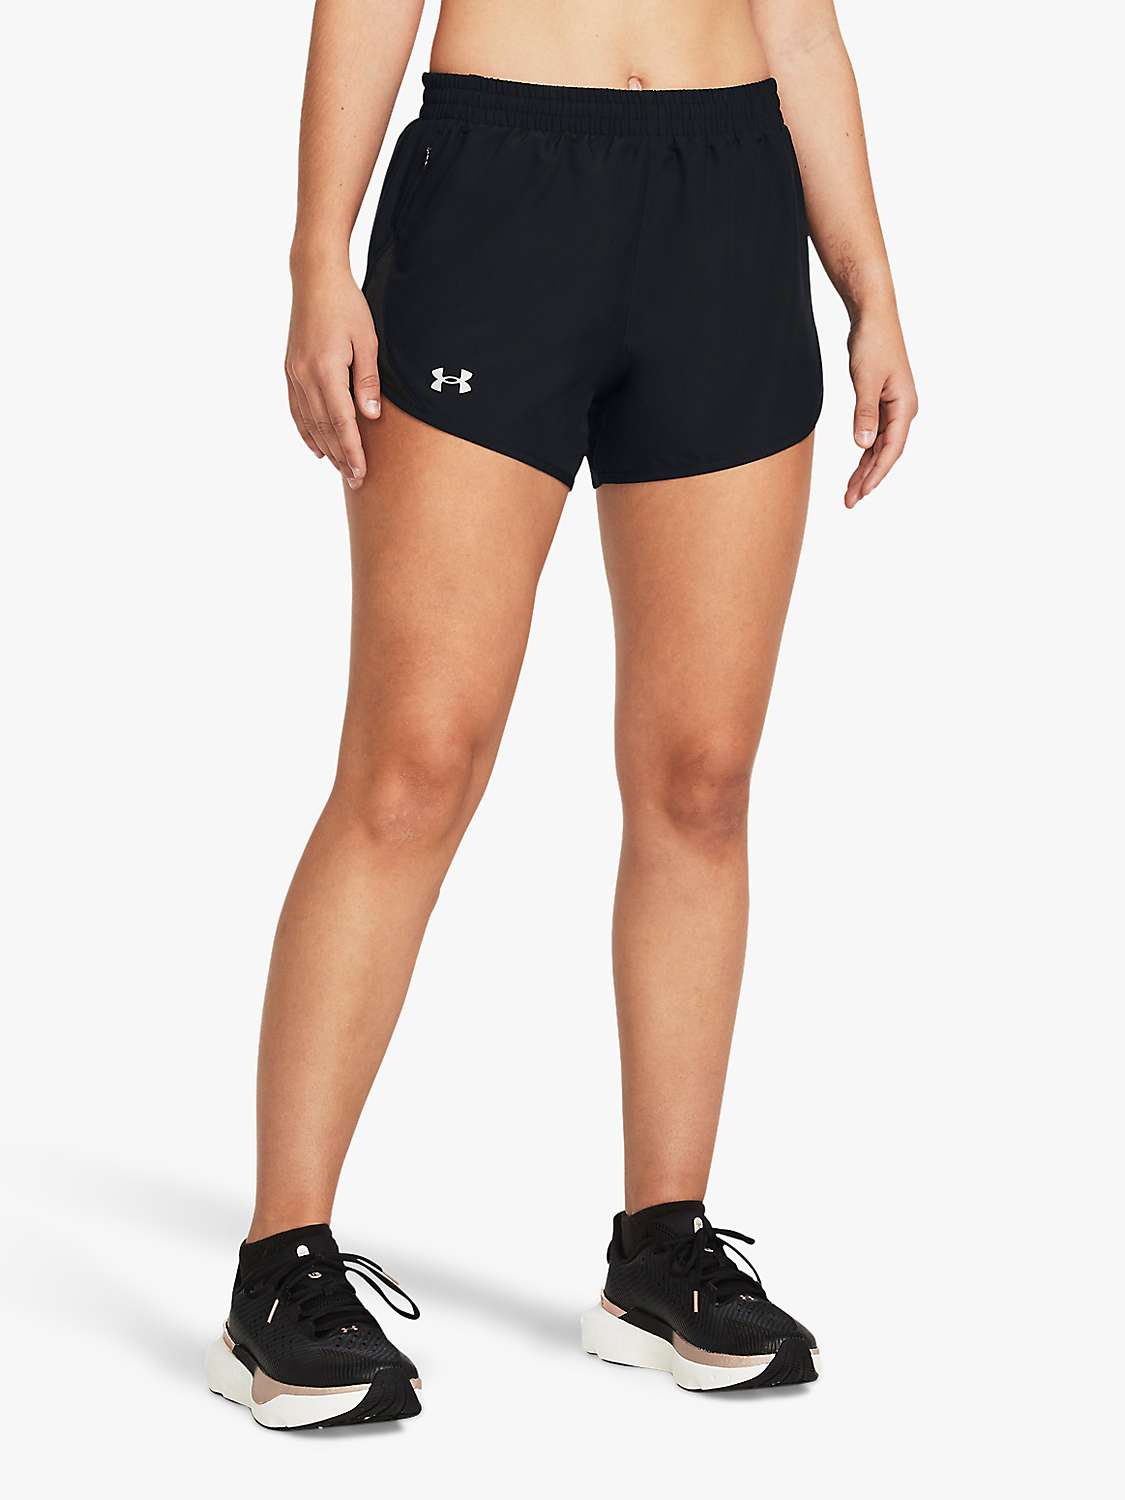 Buy Under Armour Fly-By 3" Women's Running Shorts, Black/Reflective Online at johnlewis.com